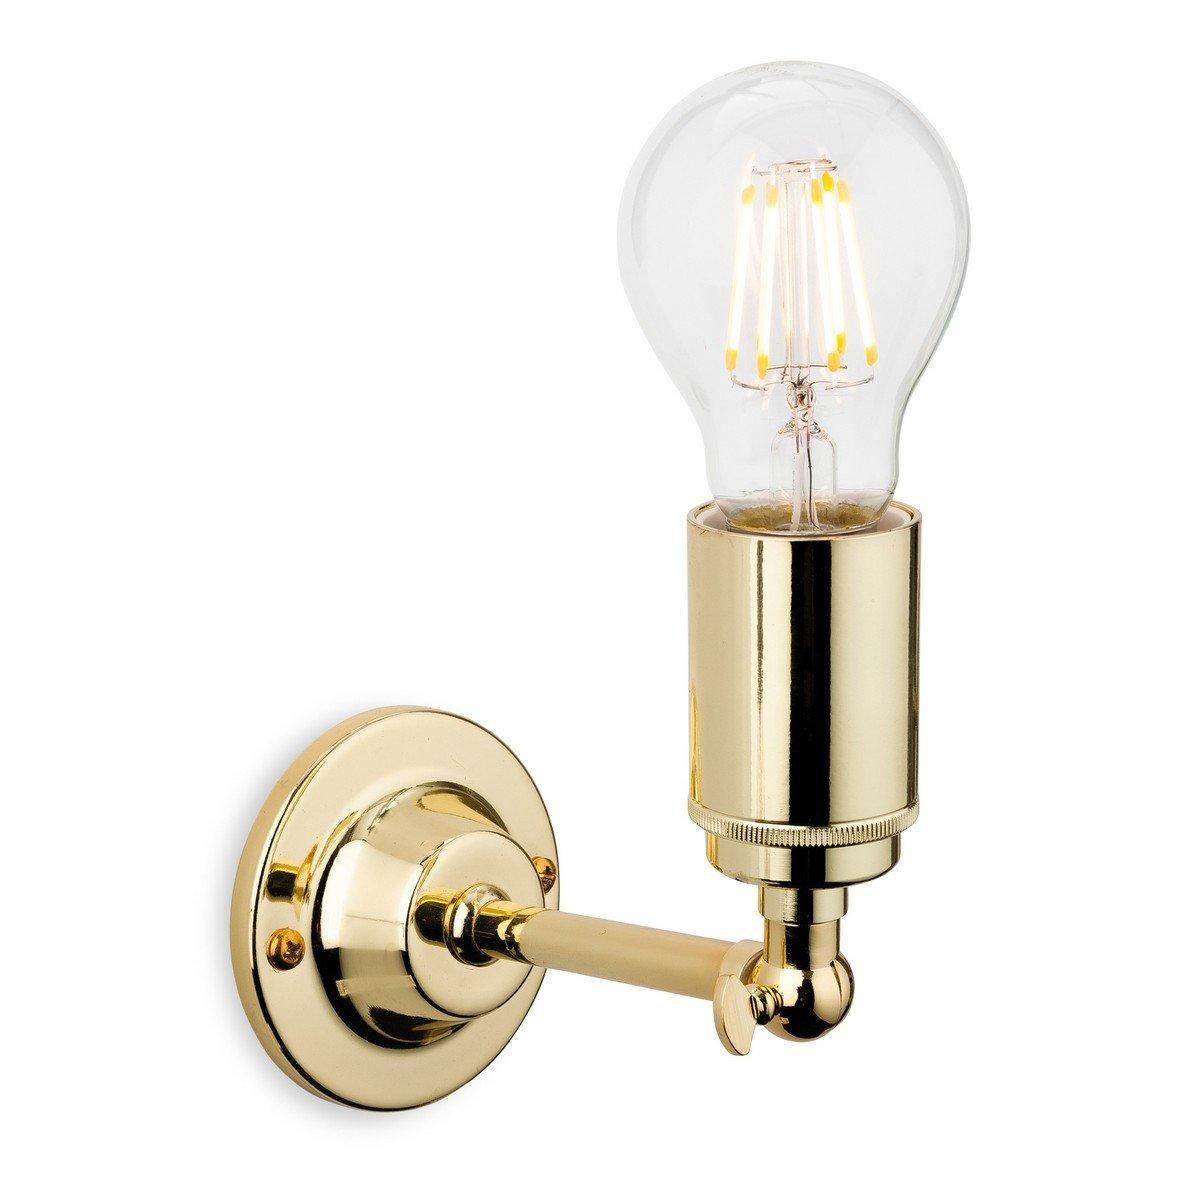 Indy 1 Light Indoor Candle Wall Light Polished Brass E27